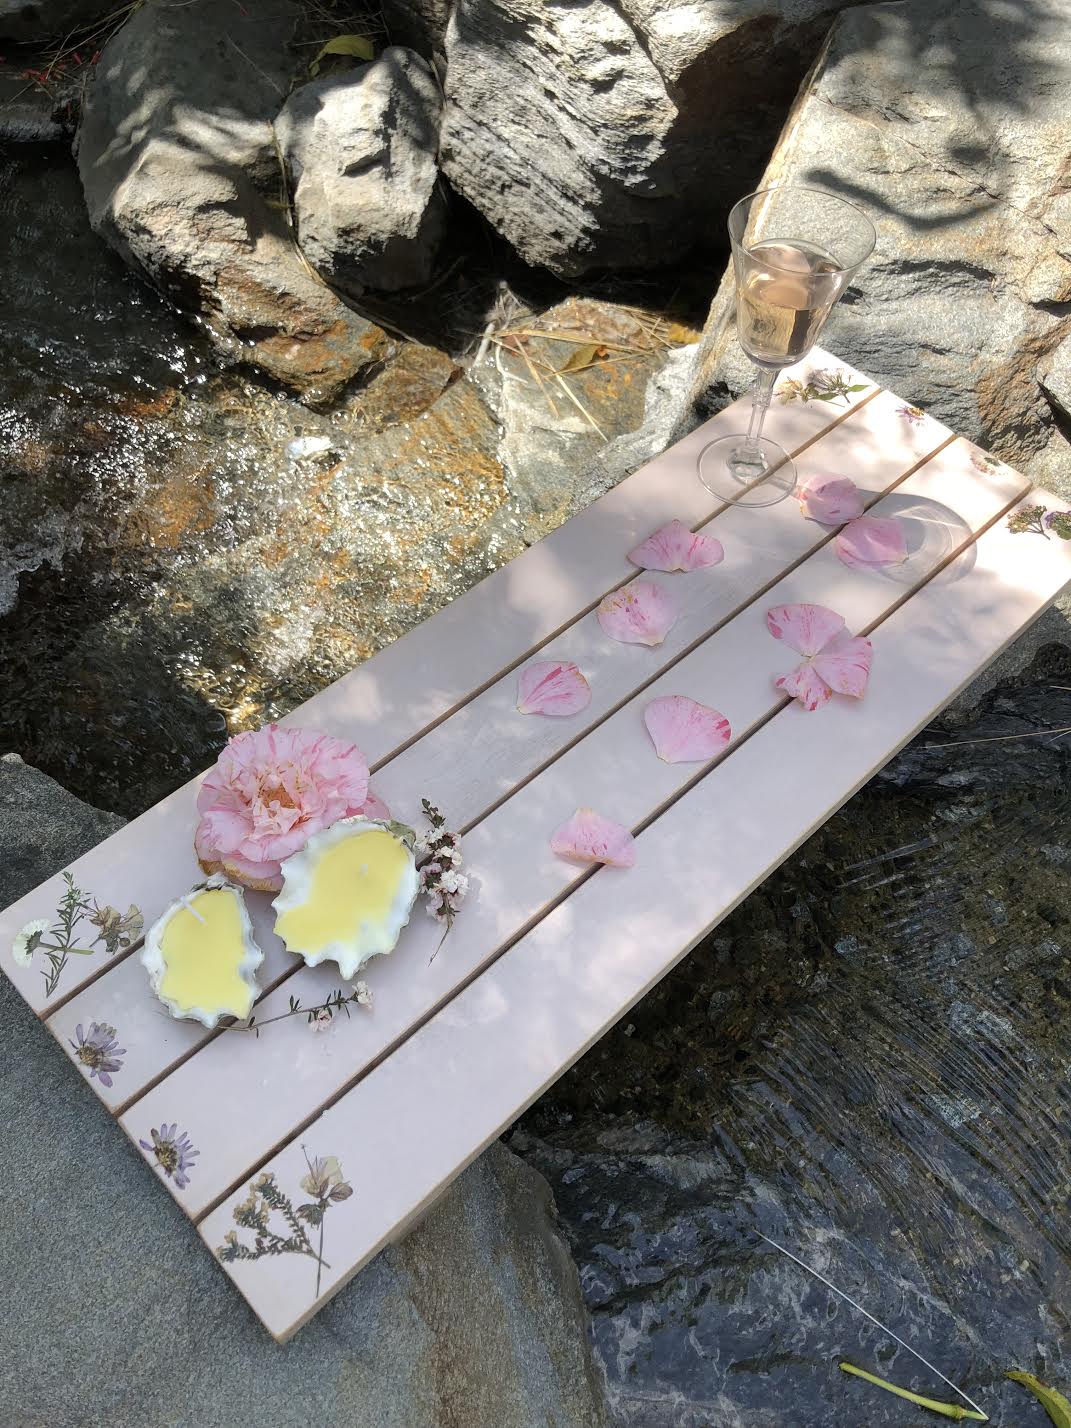 Handmade painted wood bath tray with pressed flowers